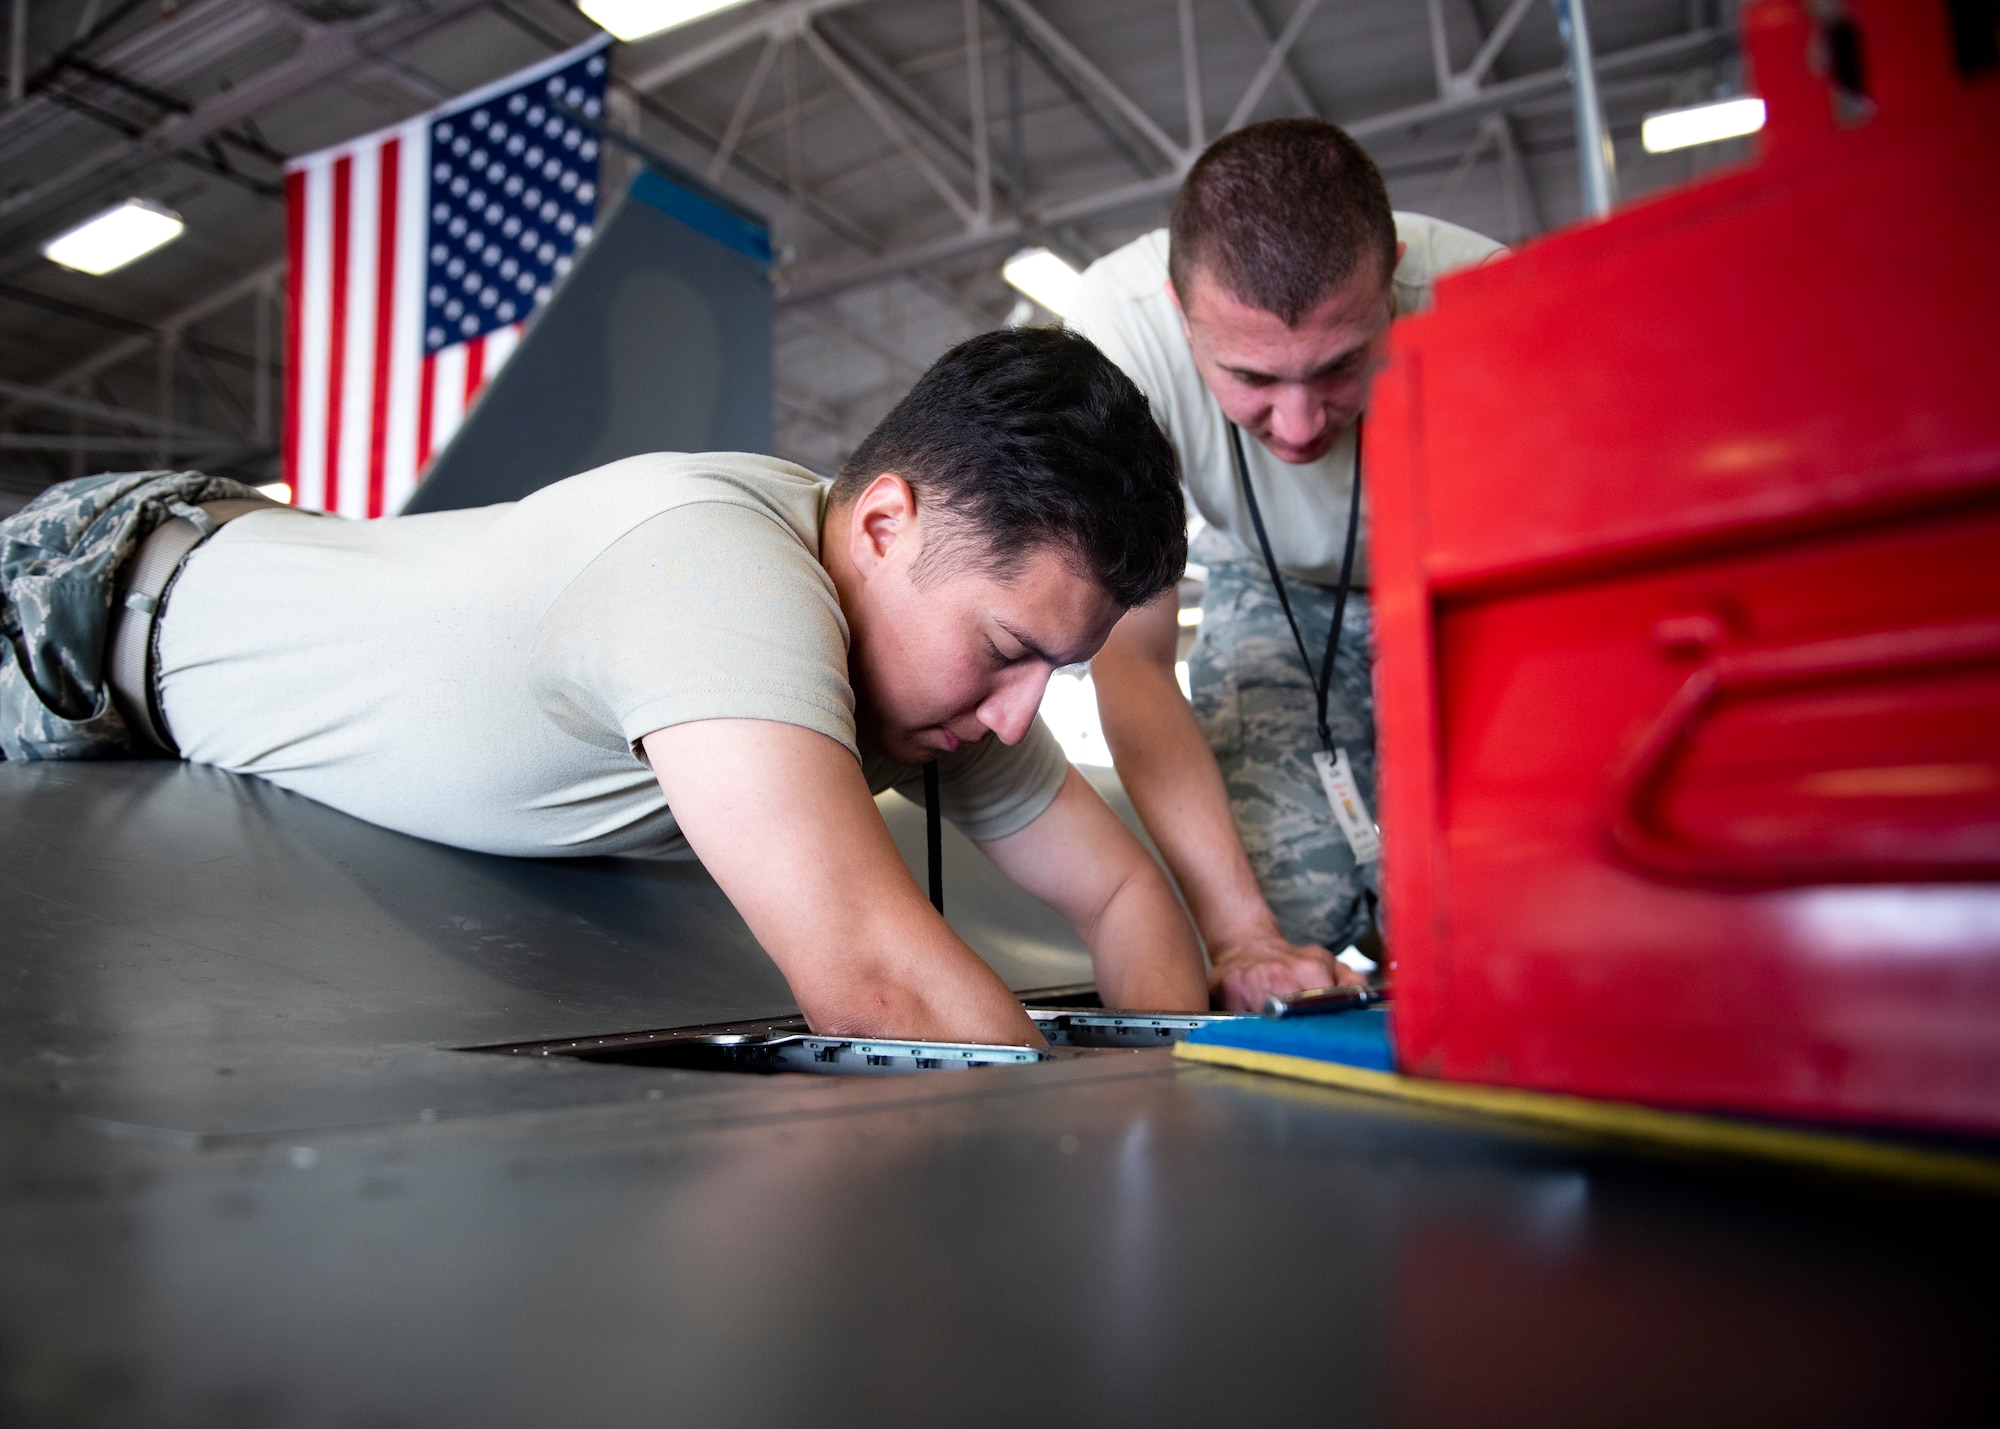 Airman 1st Class Christopher Corso and Airman 1st Class Ryan Sandoval, 364th Training Squadron electrical and environmental systems apprentice course students, remove and install a bleed air check valve at Sheppard Air Force Base, Texas, June 14, 2019. The valve prevents reverse air flow if one of the engines aren't functioning properly and keeps the air flowing all in one direction. Preferably to the flight-deck to regulate air pressure. (U.S. Air Force photo by Airman 1st Class Pedro Tenorio)